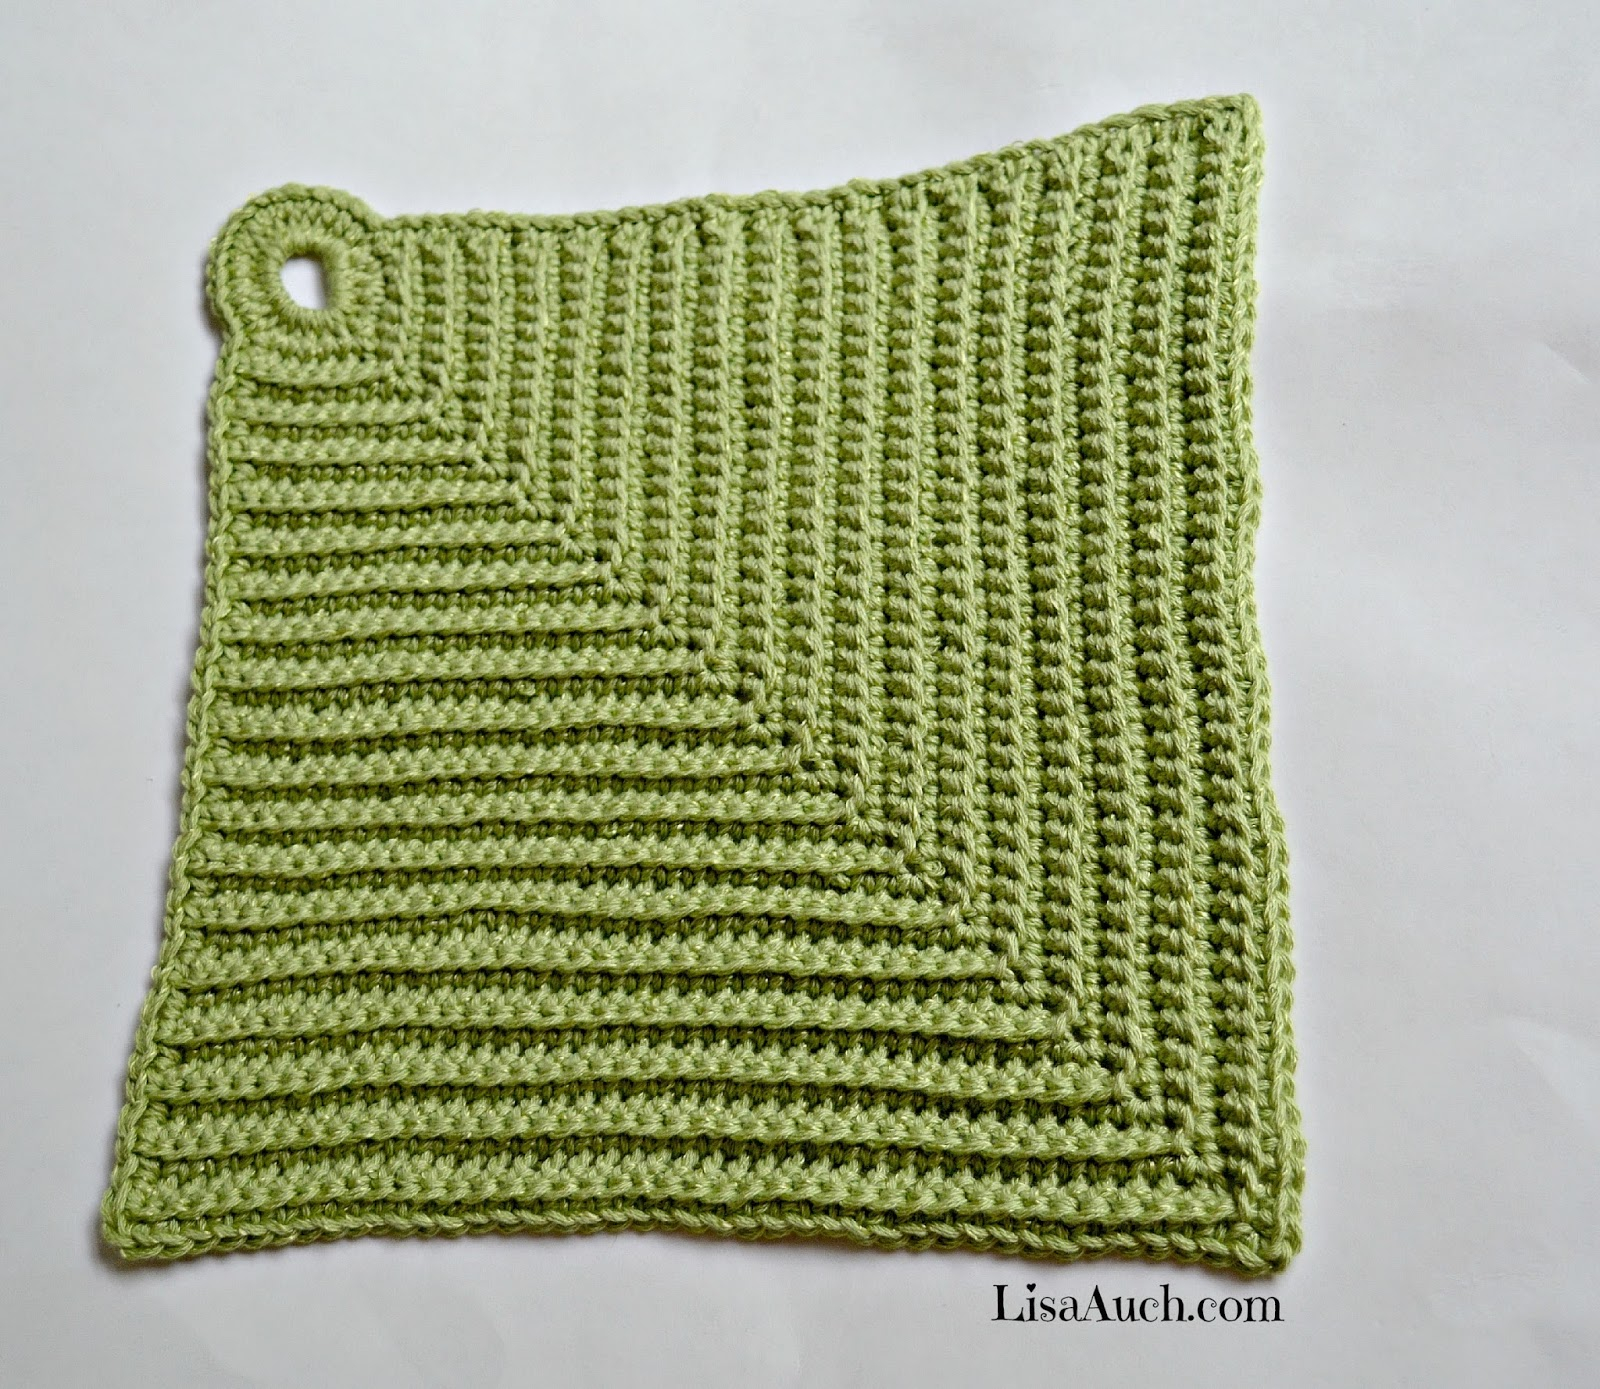 Crochet Dishcloth Free Pattern Free Crochet Patterns And Designs Lisaauch Free Easy Crochet